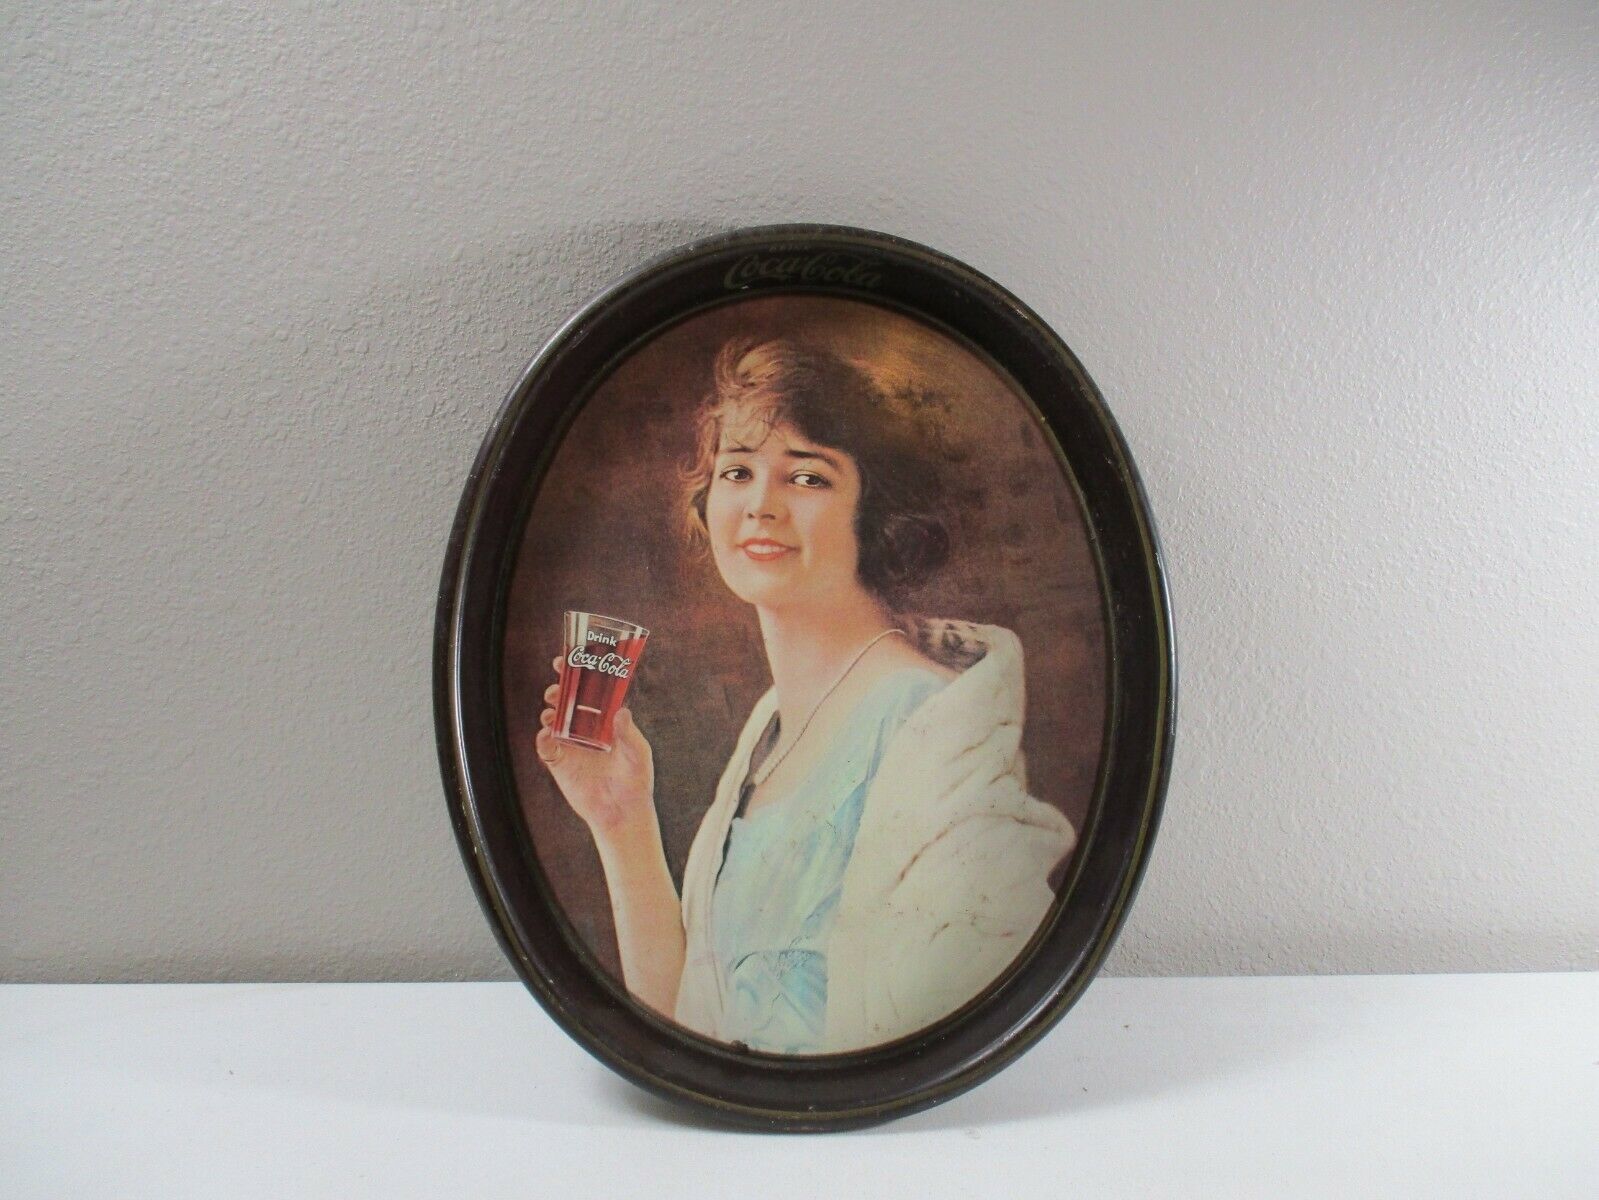 Primary image for Vintage COCA COLA oval tin serving tray Retro 1923 flapper girl pictured 